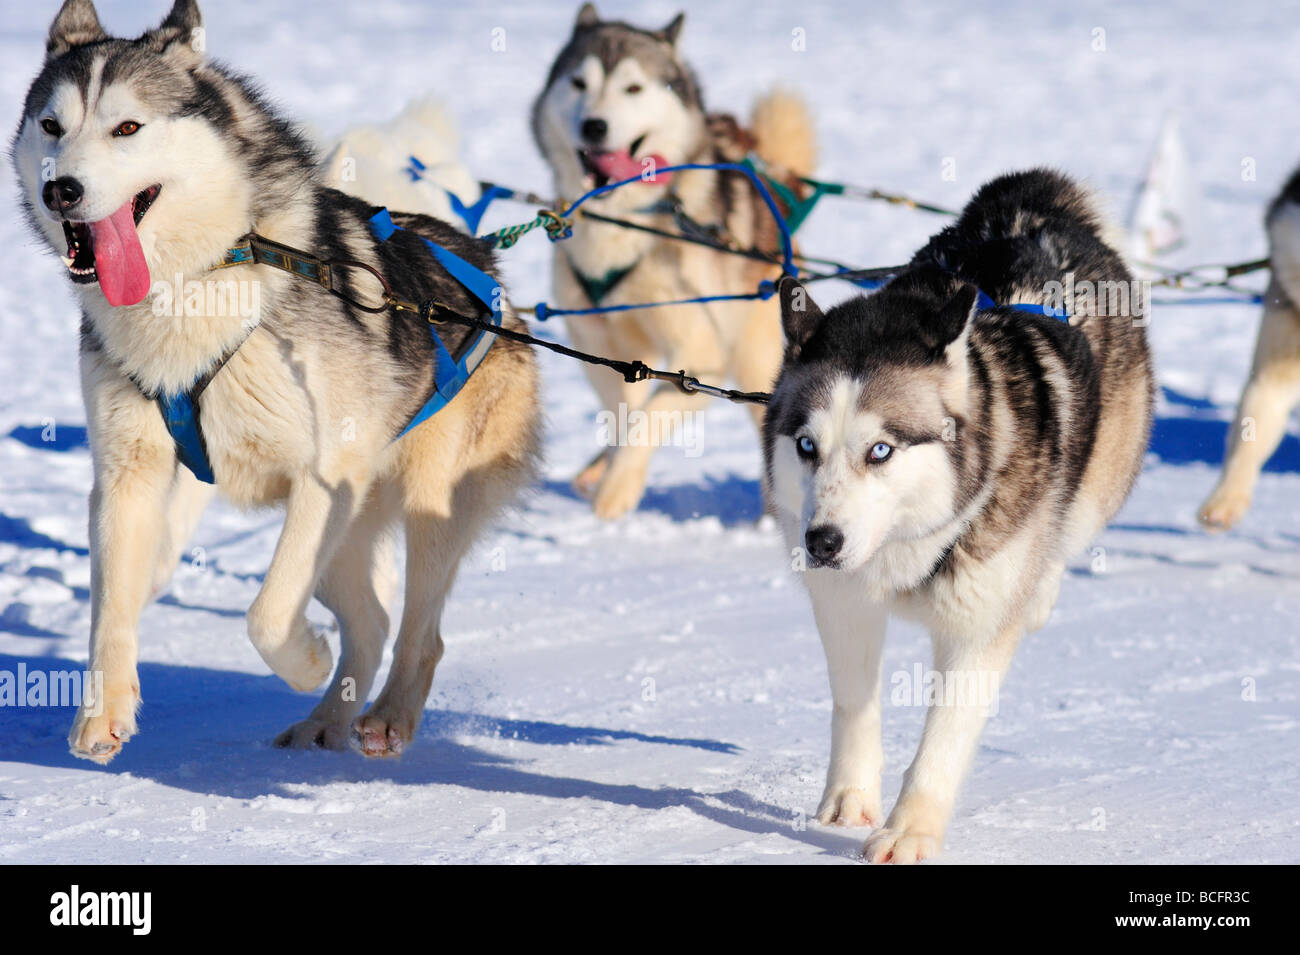 Details of a Malamute sled dog team in full action heading towards the camera Stock Photo